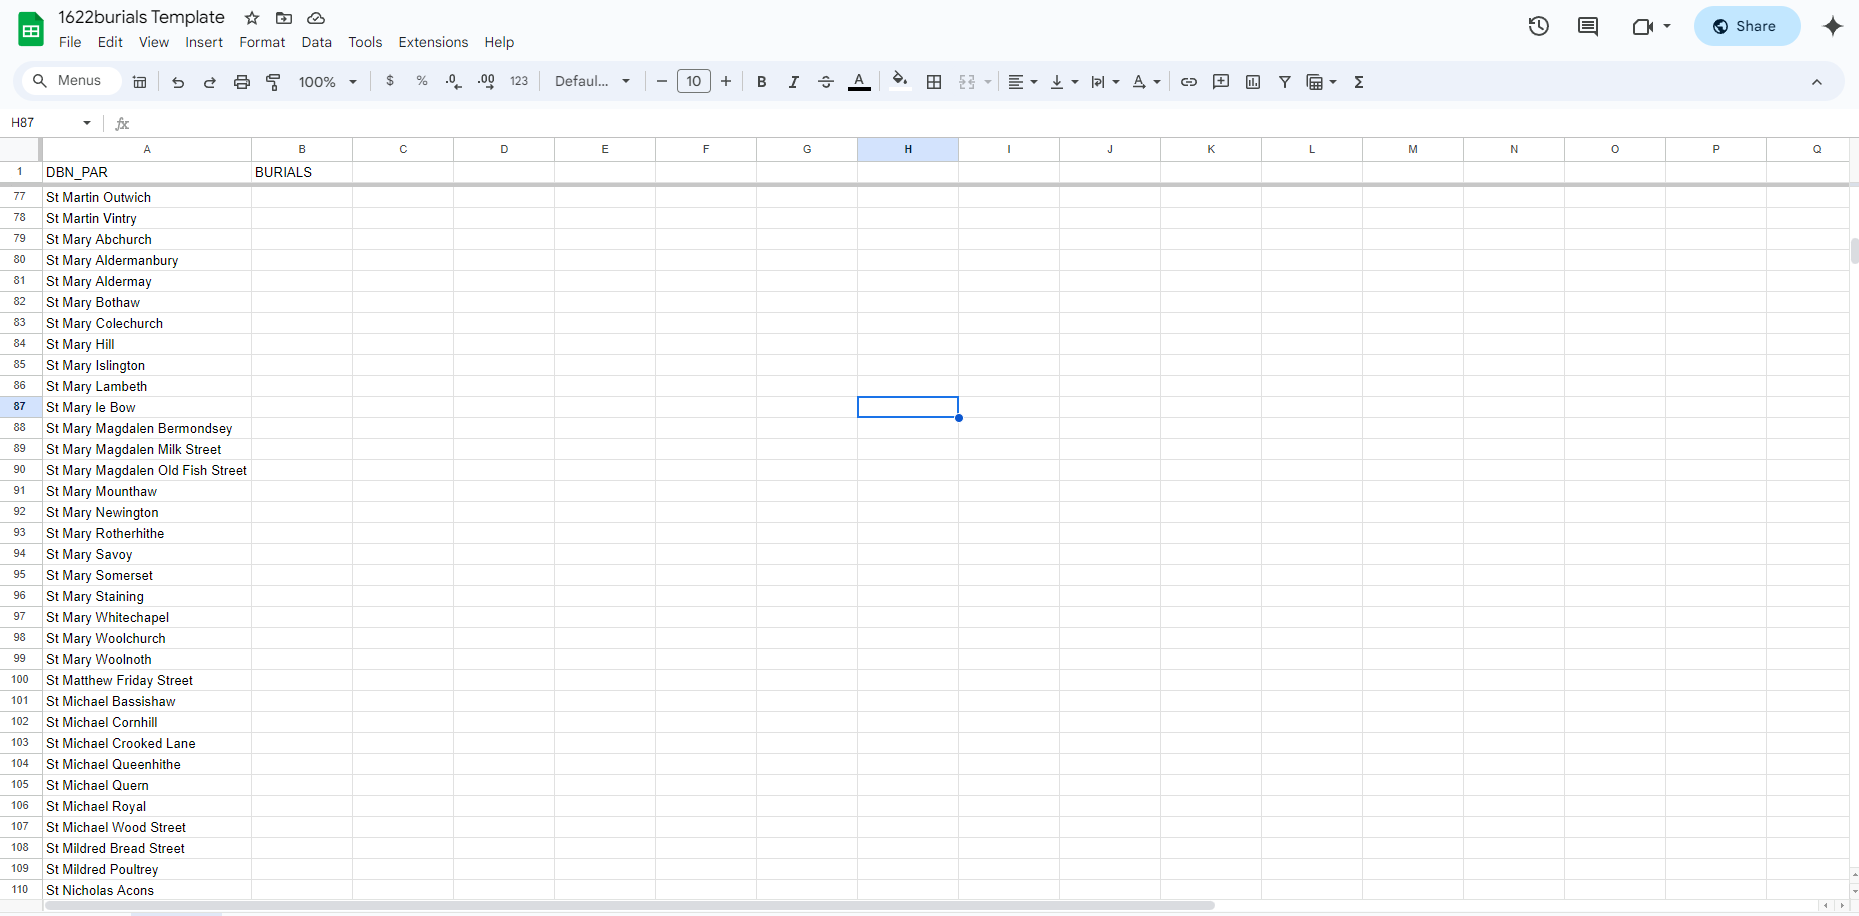  A screenshot of a Google Sheets spreadsheet titled '1622burials Template' The X-Axis represents two columns, 'DBN_PAR' and 'BURIALS.' The Y-Axis lists off the names of all parishes in this study